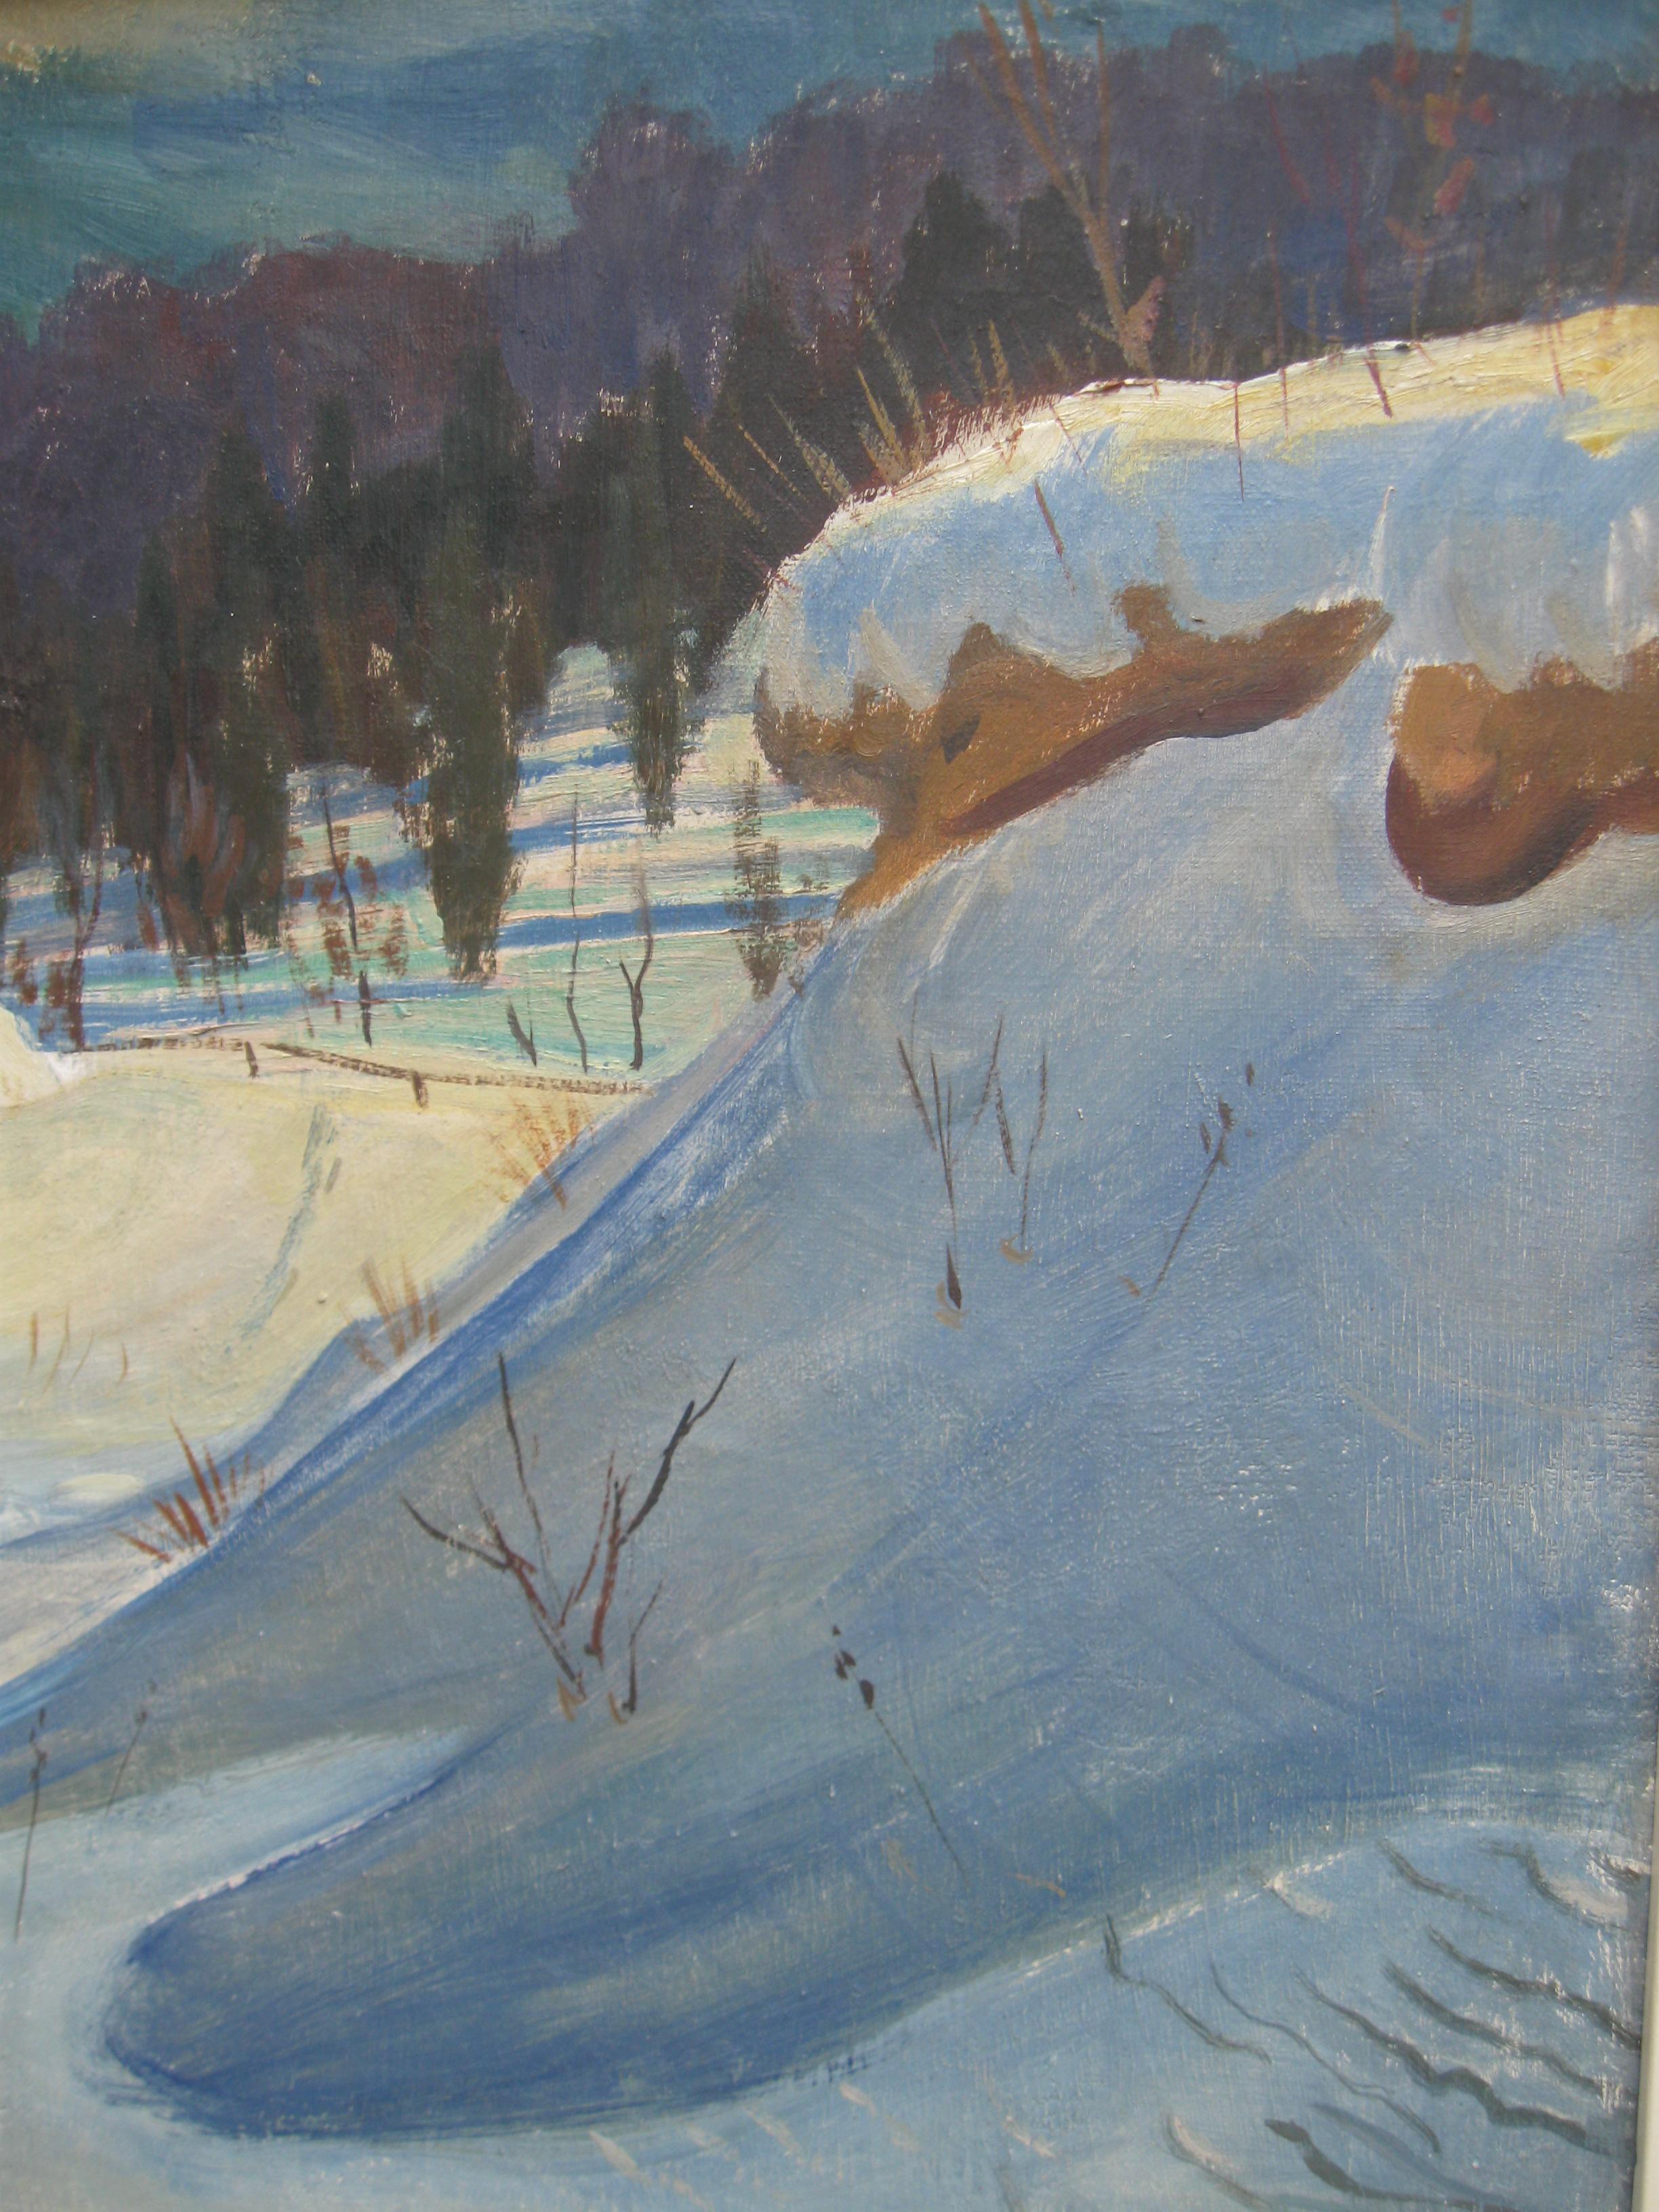 Snowdrifts in a Wooded Landscape oil on canvas circa 1950's - Gray Landscape Painting by Unknown